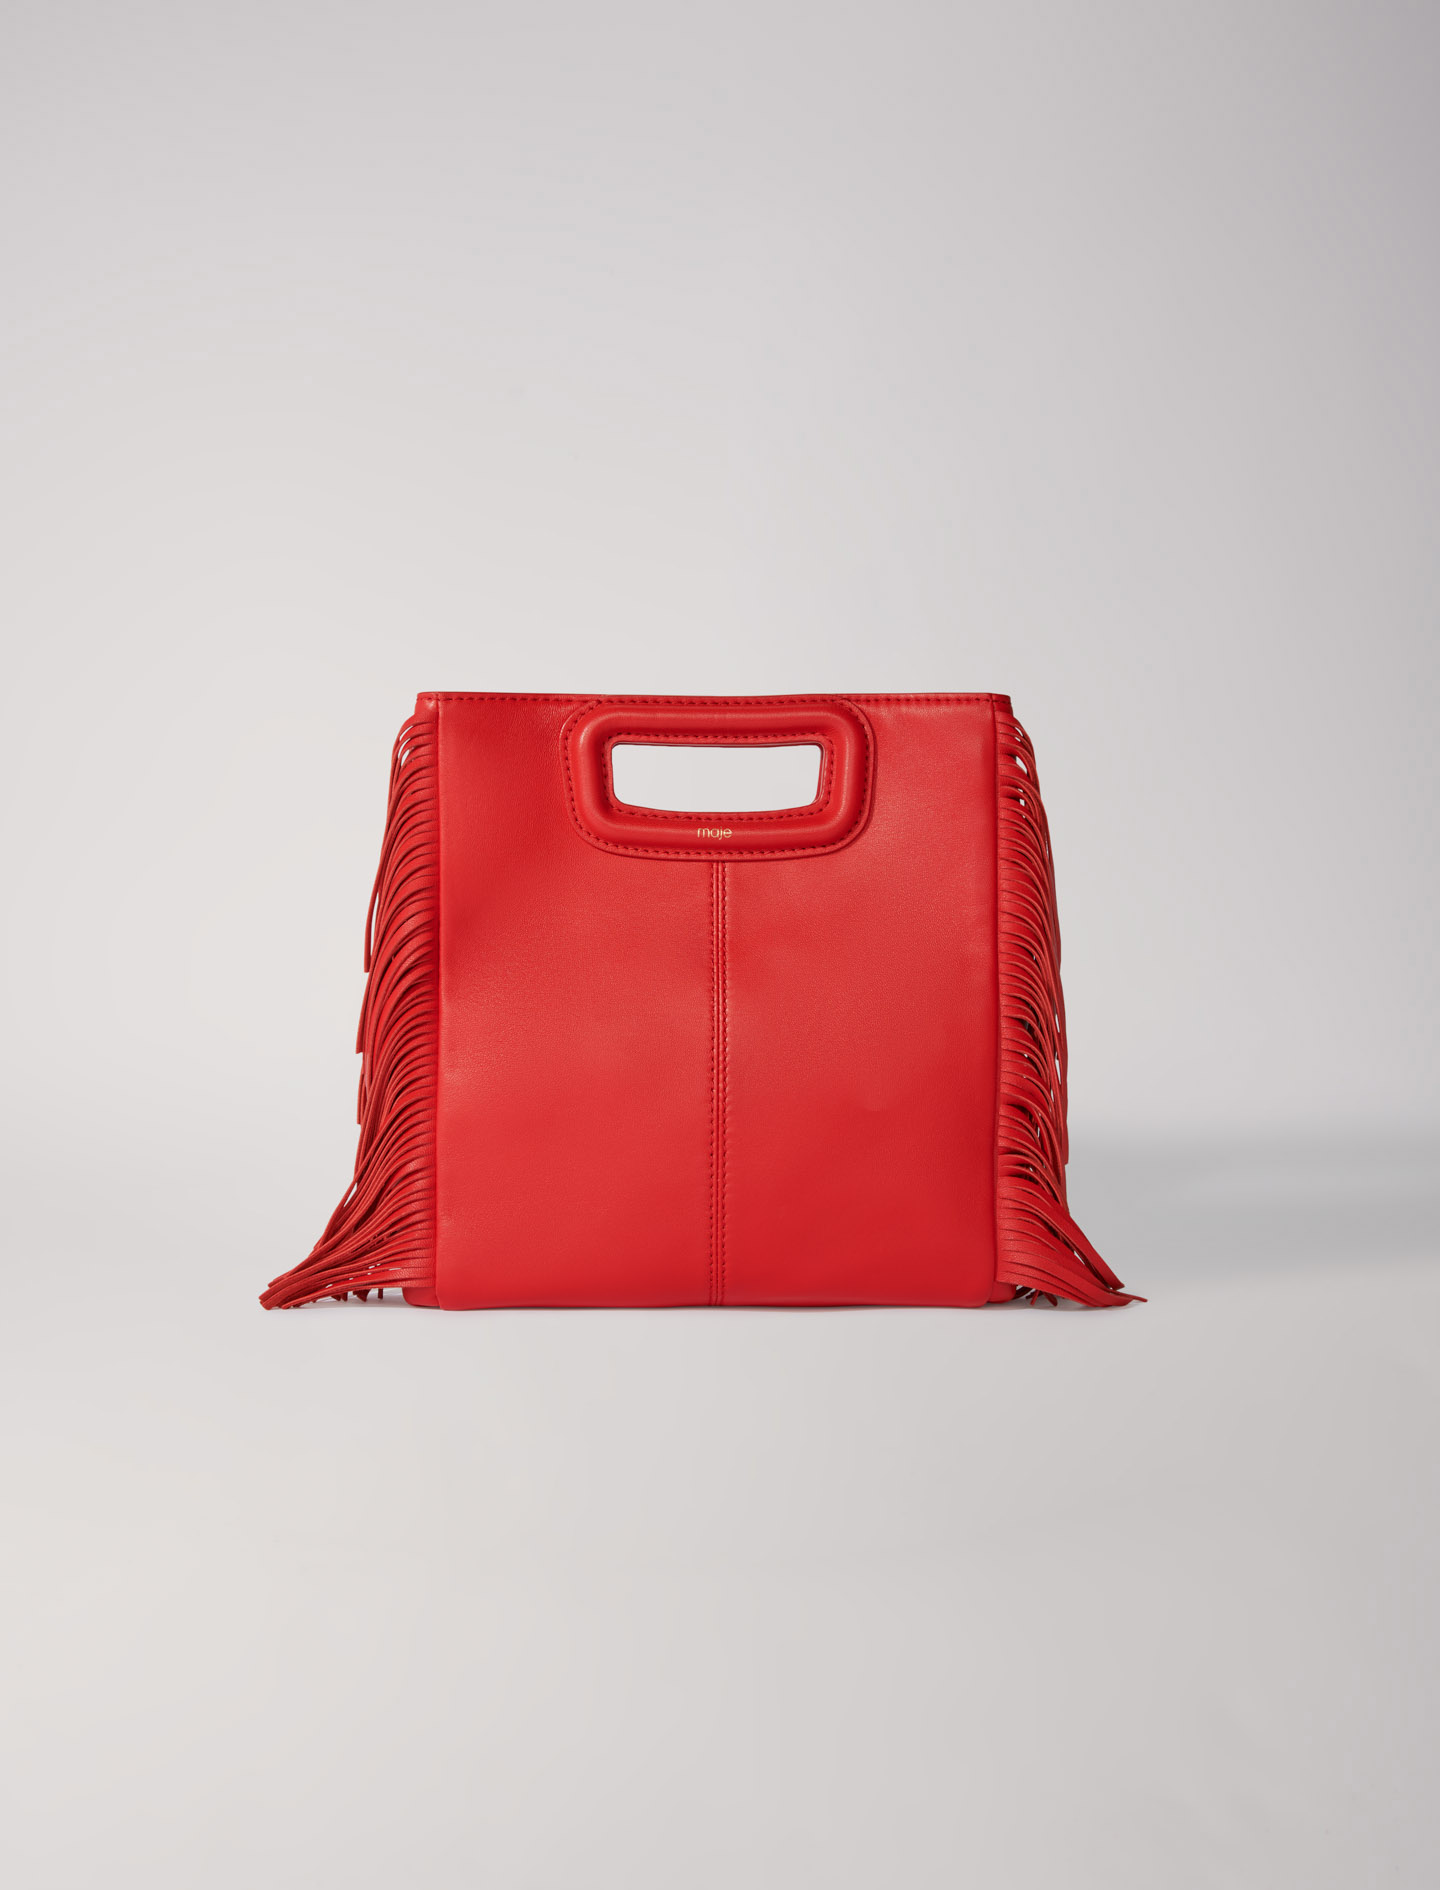 Mixte's polyester Leather: Smooth leather M bag with fringing for Fall/Winter, size Mixte-All Bags-OS (ONE SIZE), in color Red / Red